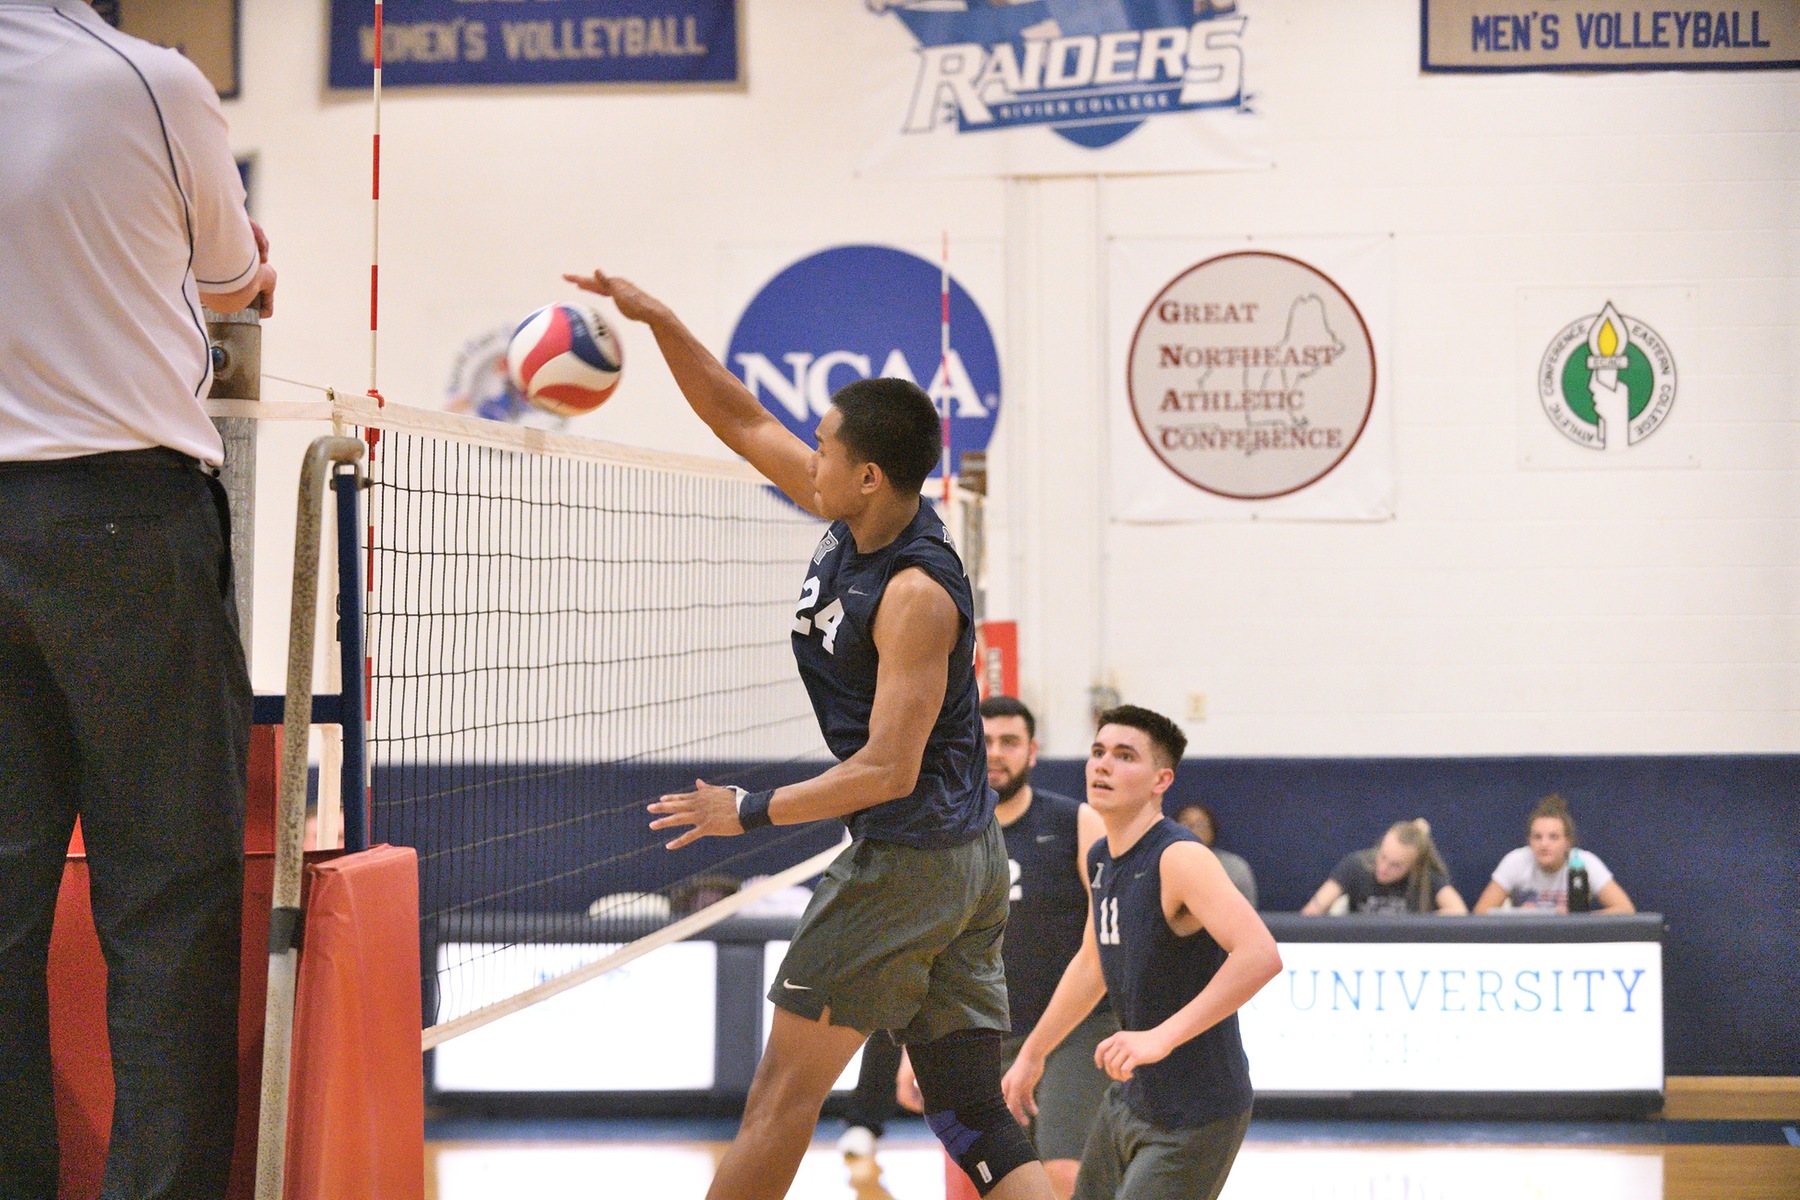 Men's Volleyball: The Raiders sweep the Chargers, 3-0.